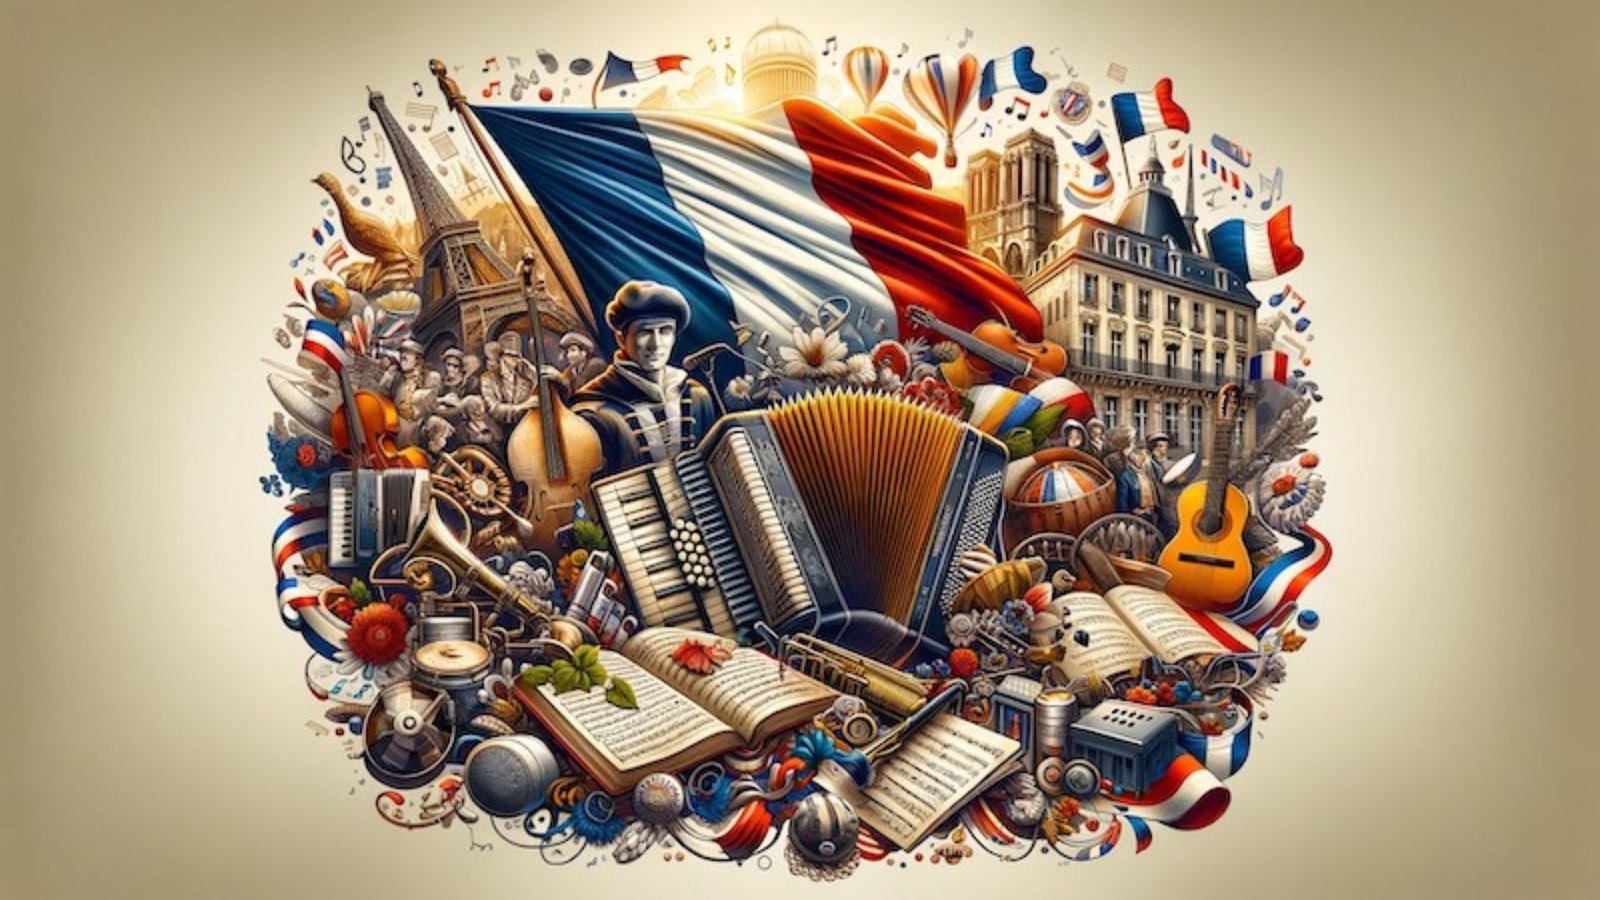 Different Musical Instruments and the French Flag 